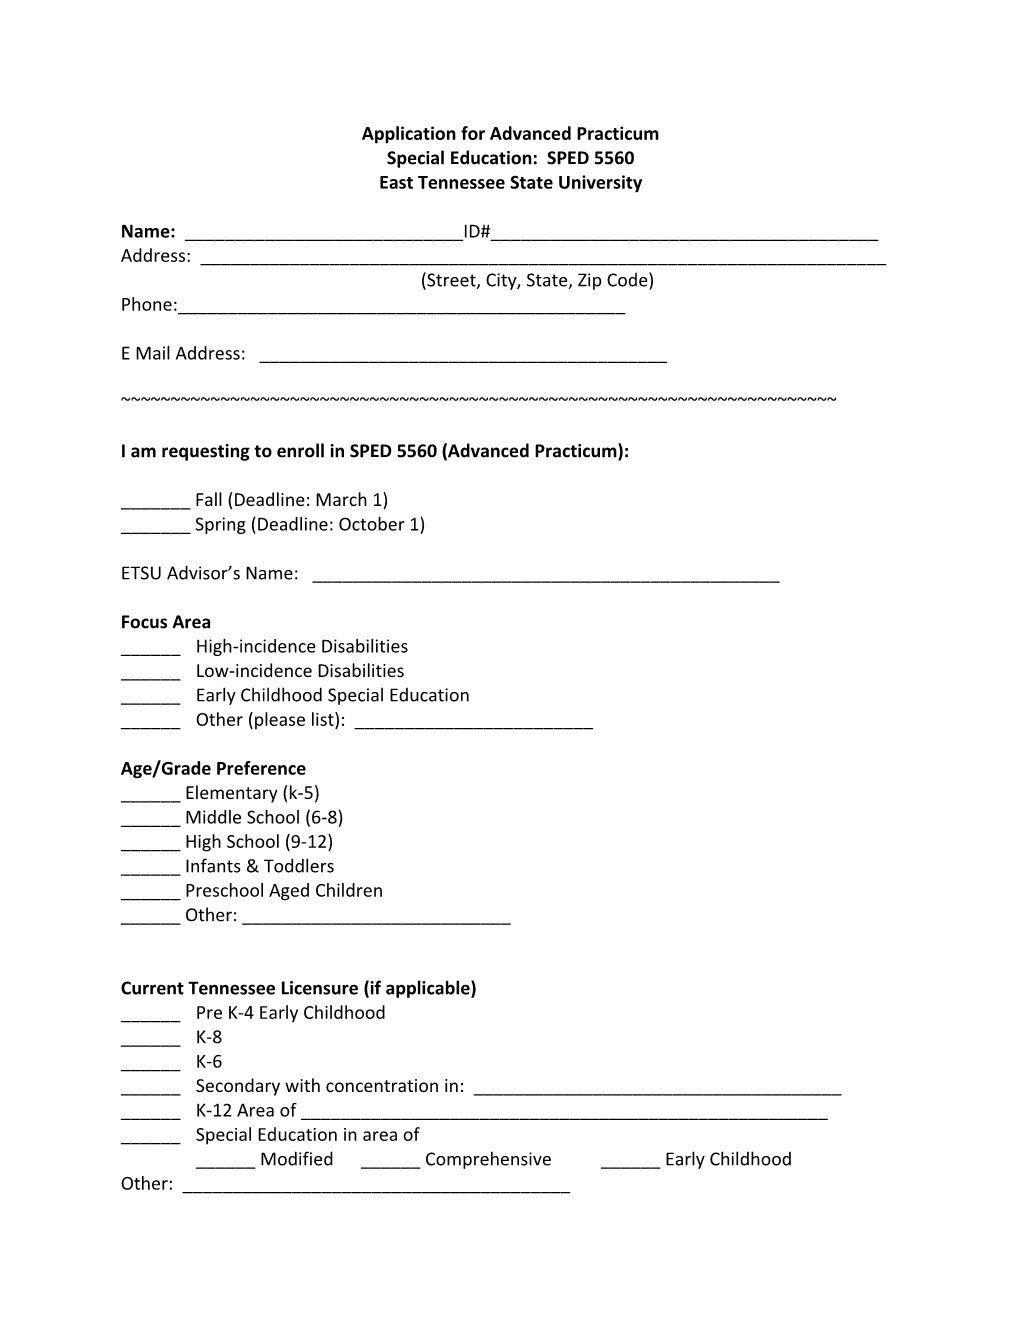 Application for Advanced Practicum